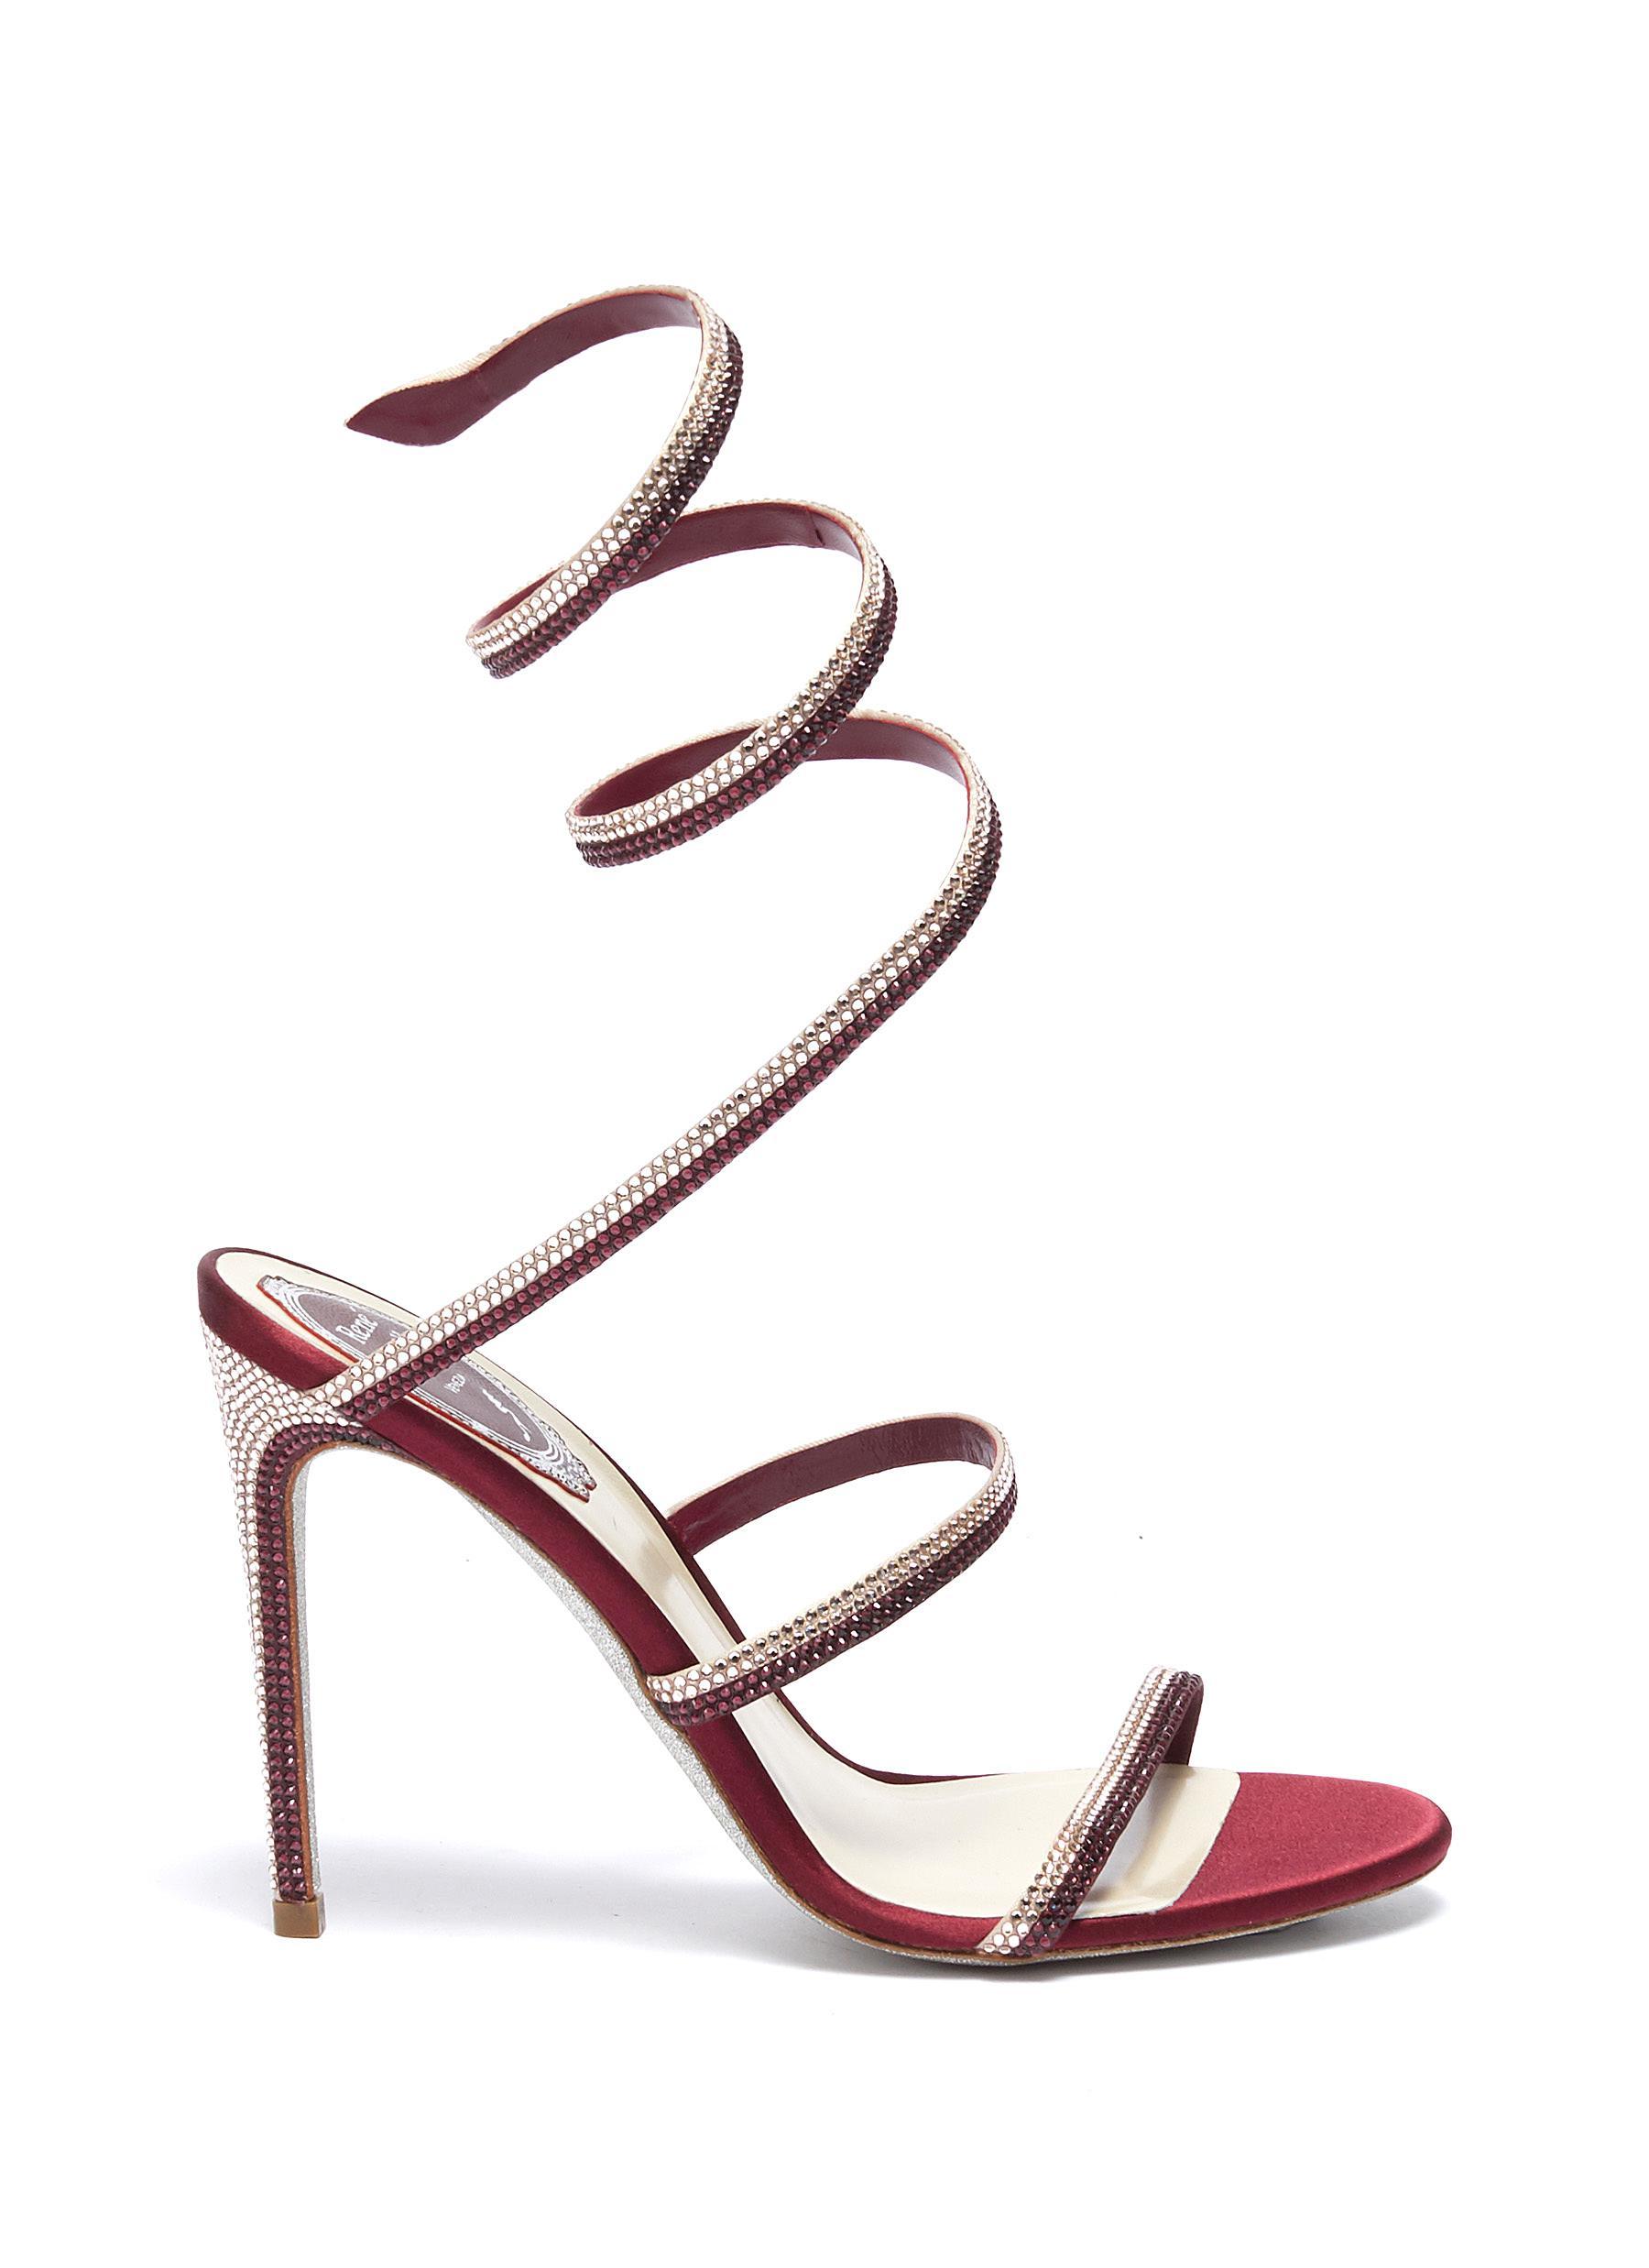 Rene Caovilla 'cleo' Strass Coil Anklet Satin Sandals in Red - Lyst